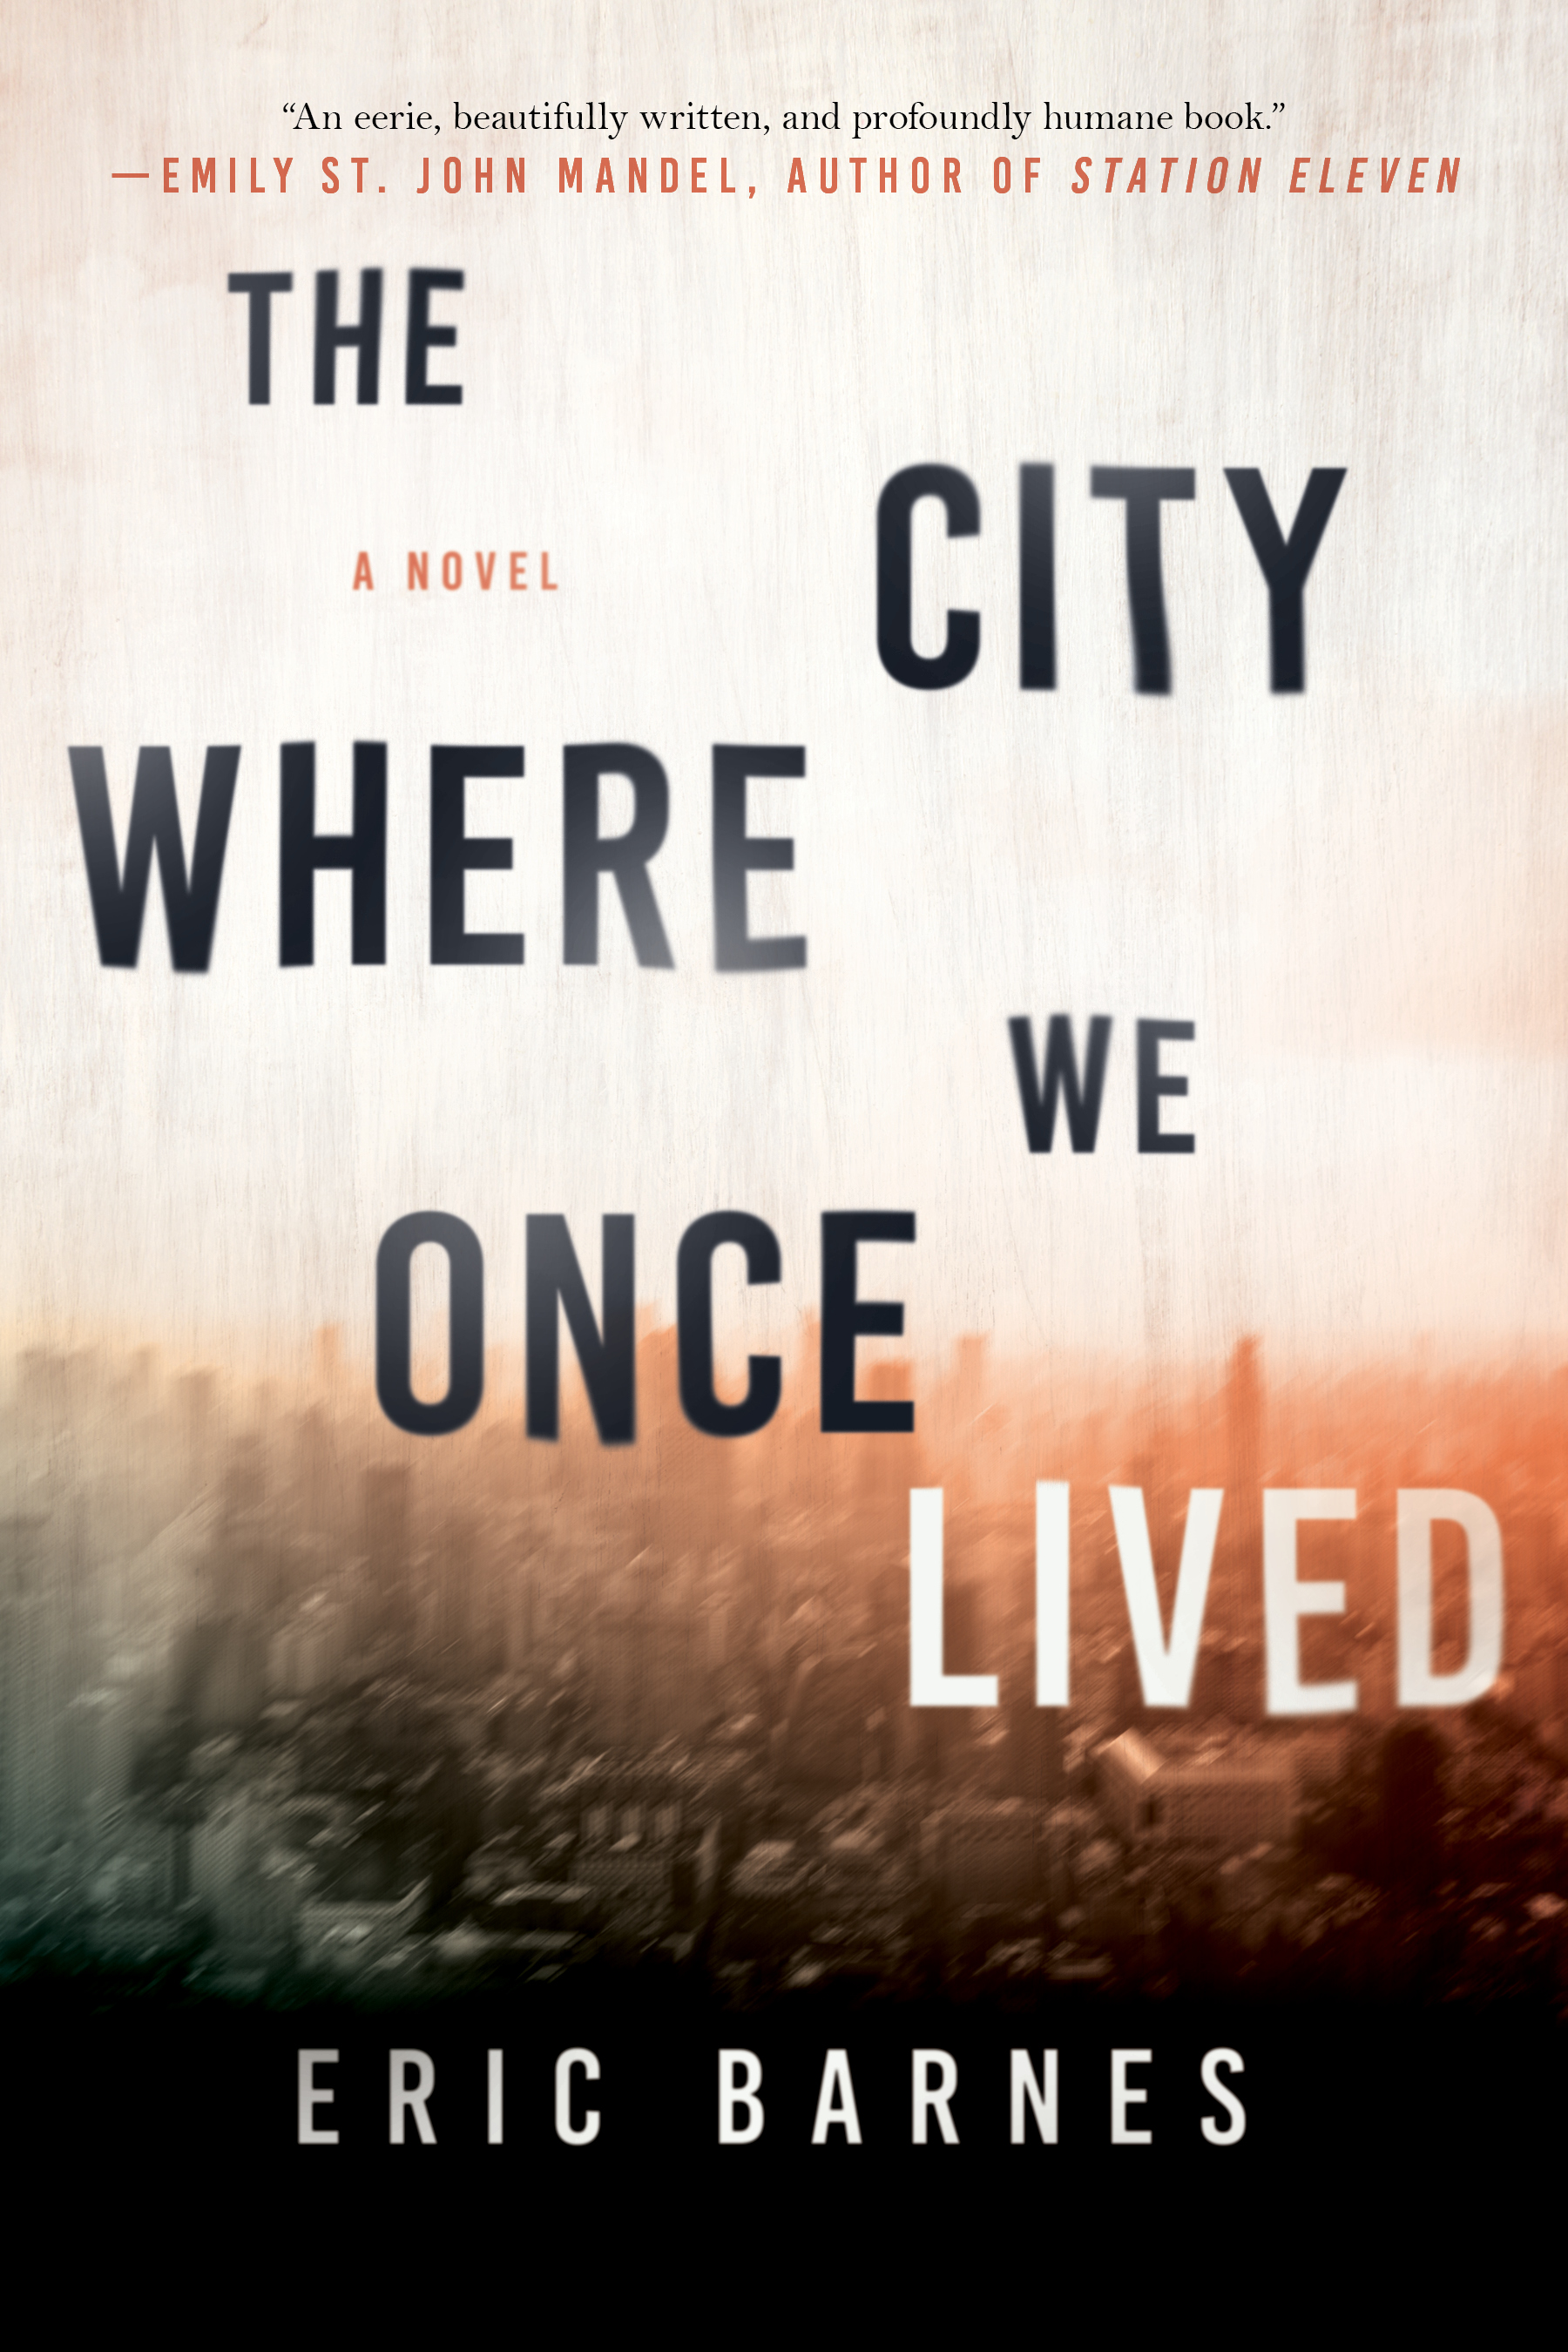 The City Where We Once Lived-Cover.jpg